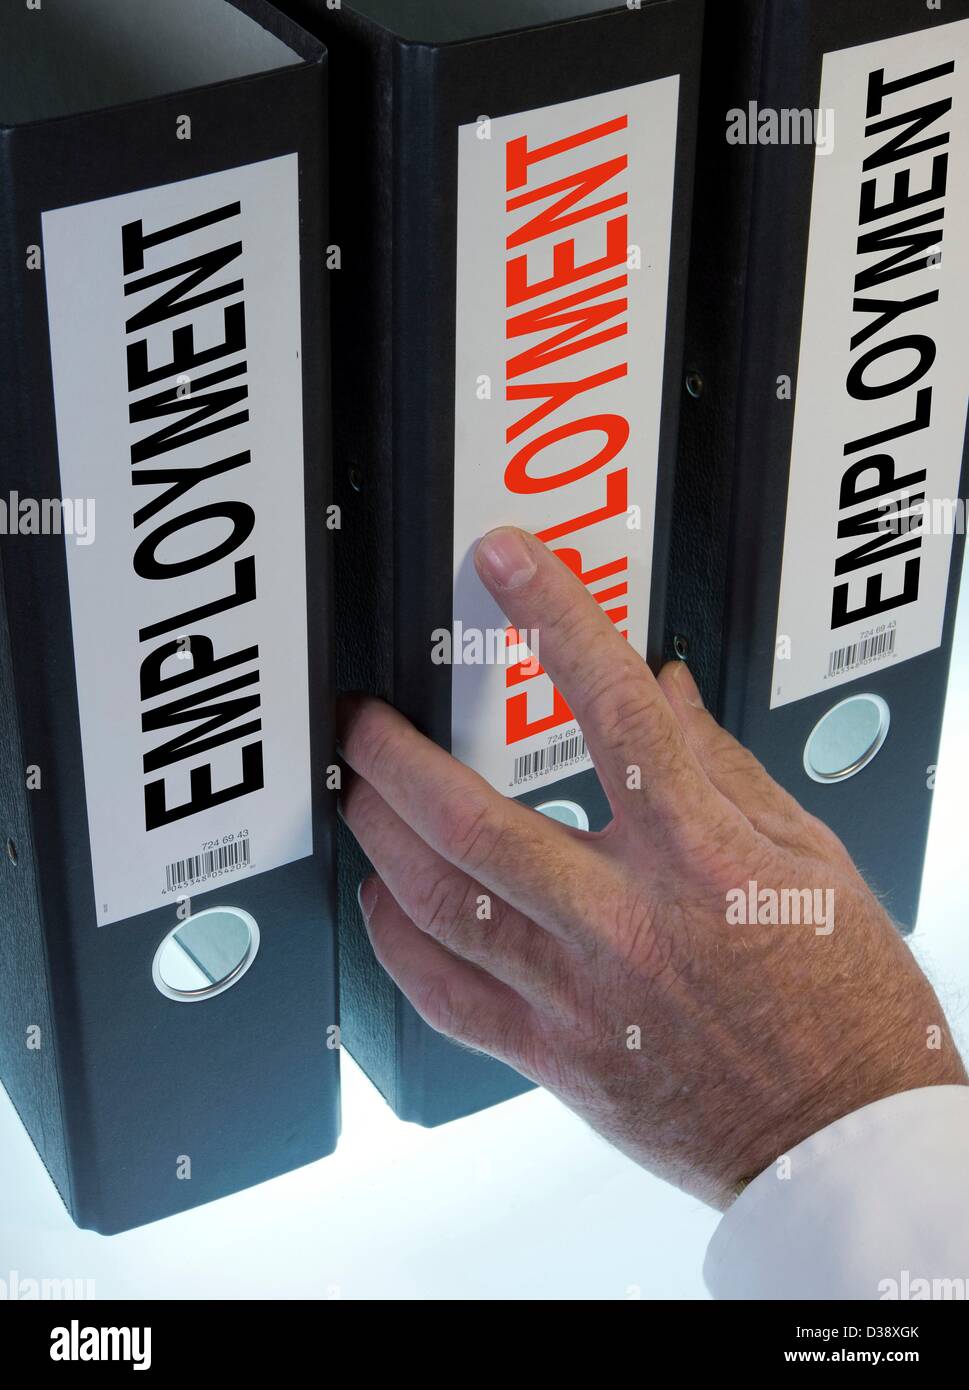 Symbol image,hand pointing to a file folder  labeled Employment Stock Photo